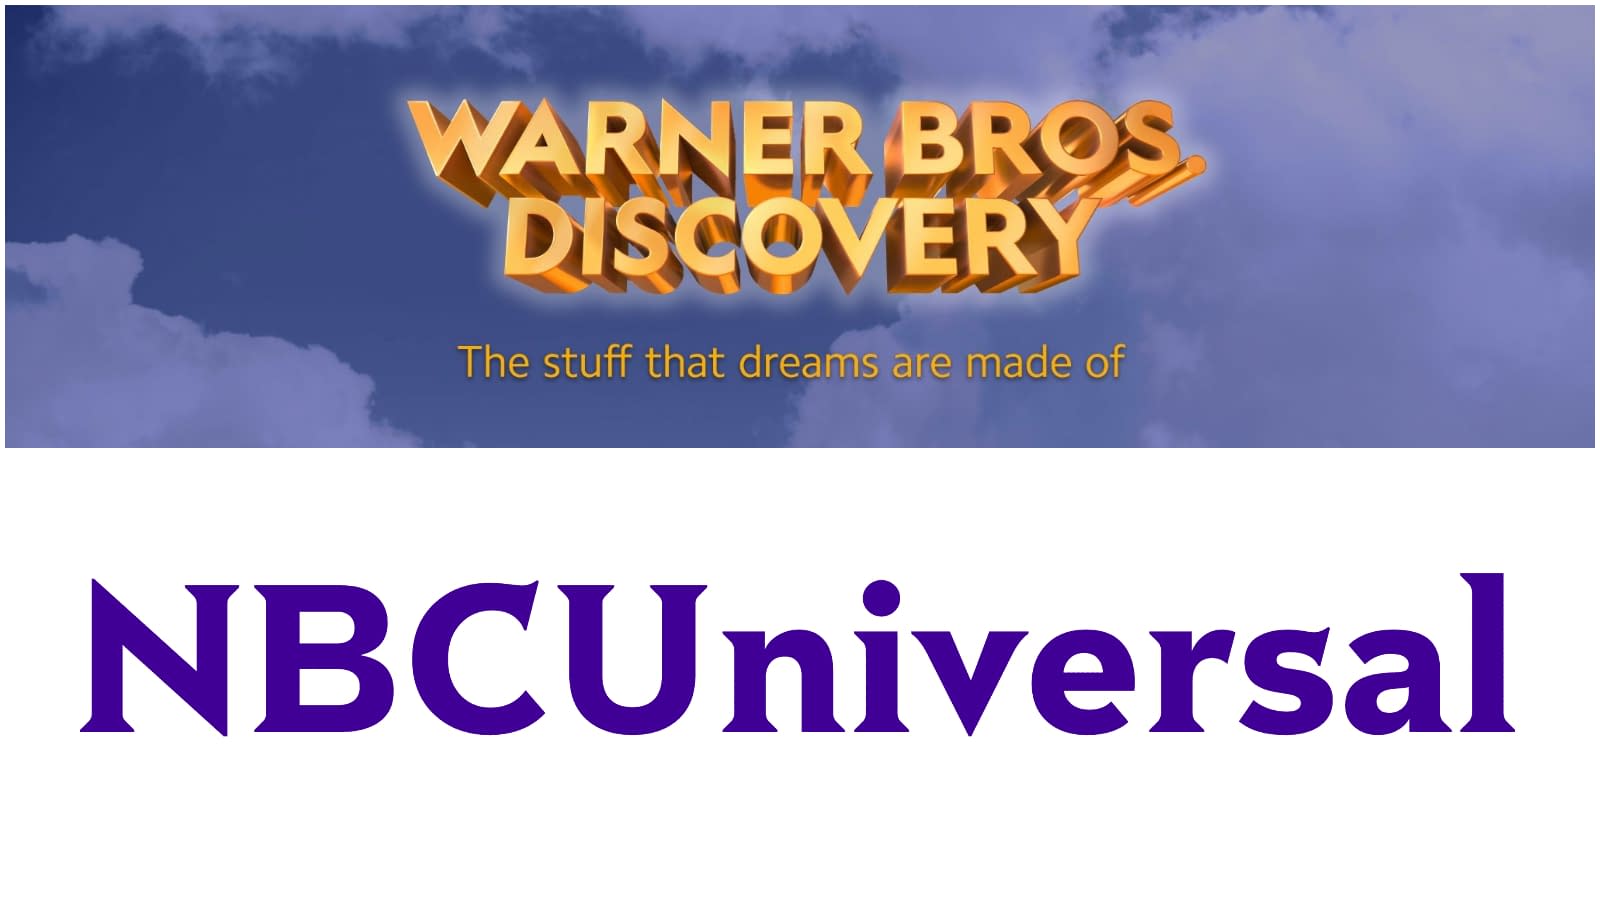 Warner Bros Discovery "Absolutely" Not For Sale WBD CEO David Zaslav